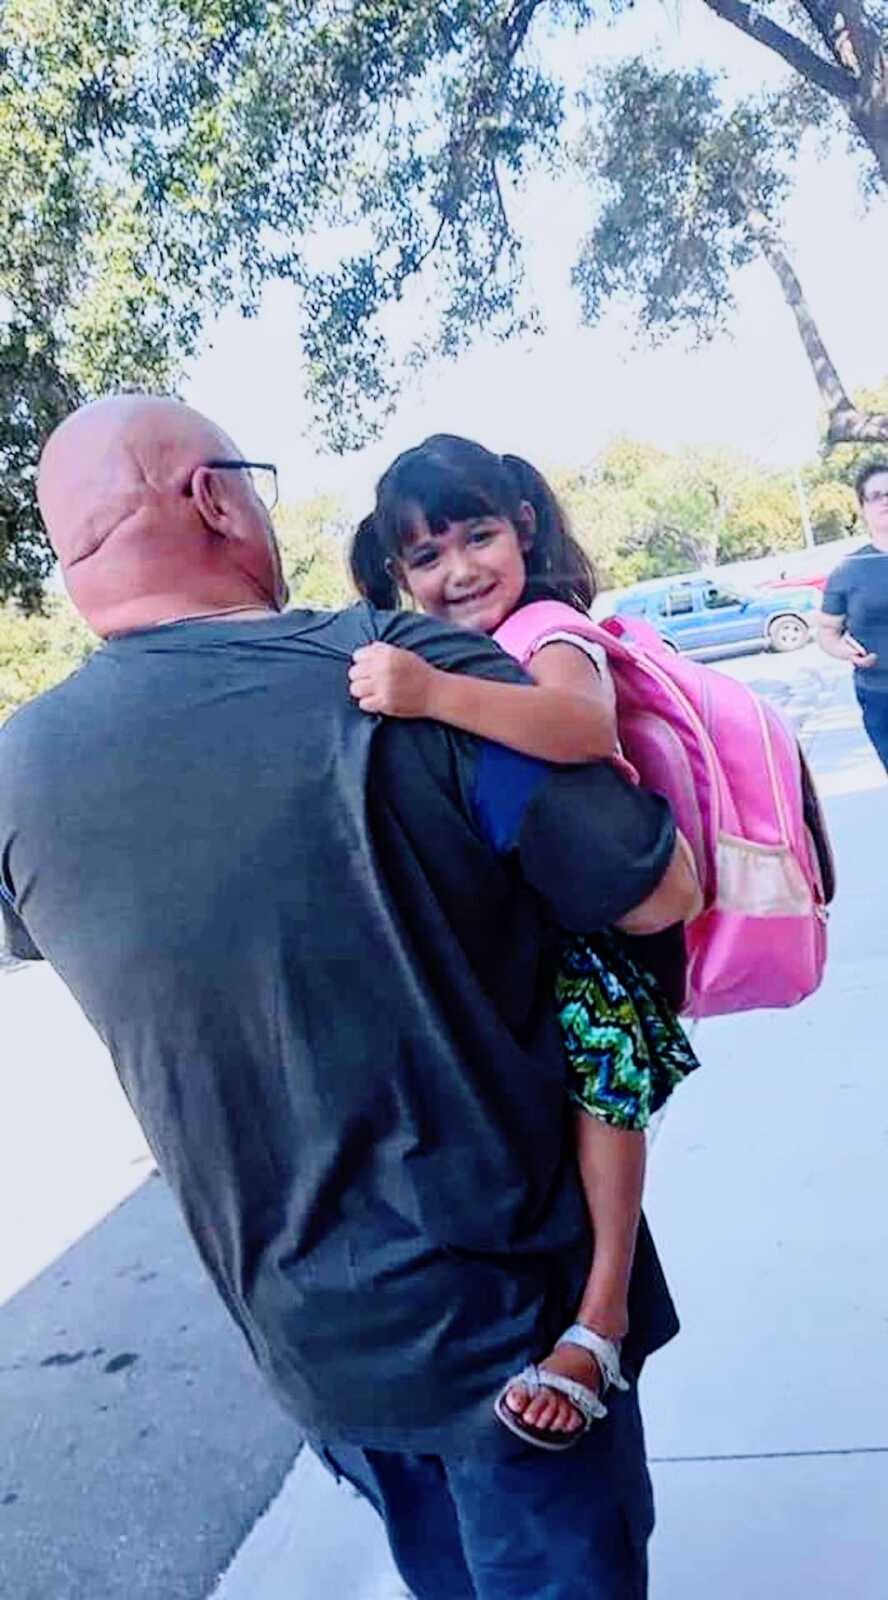 grandfather carries his granddaughter at his side while walking, she has a backpack on